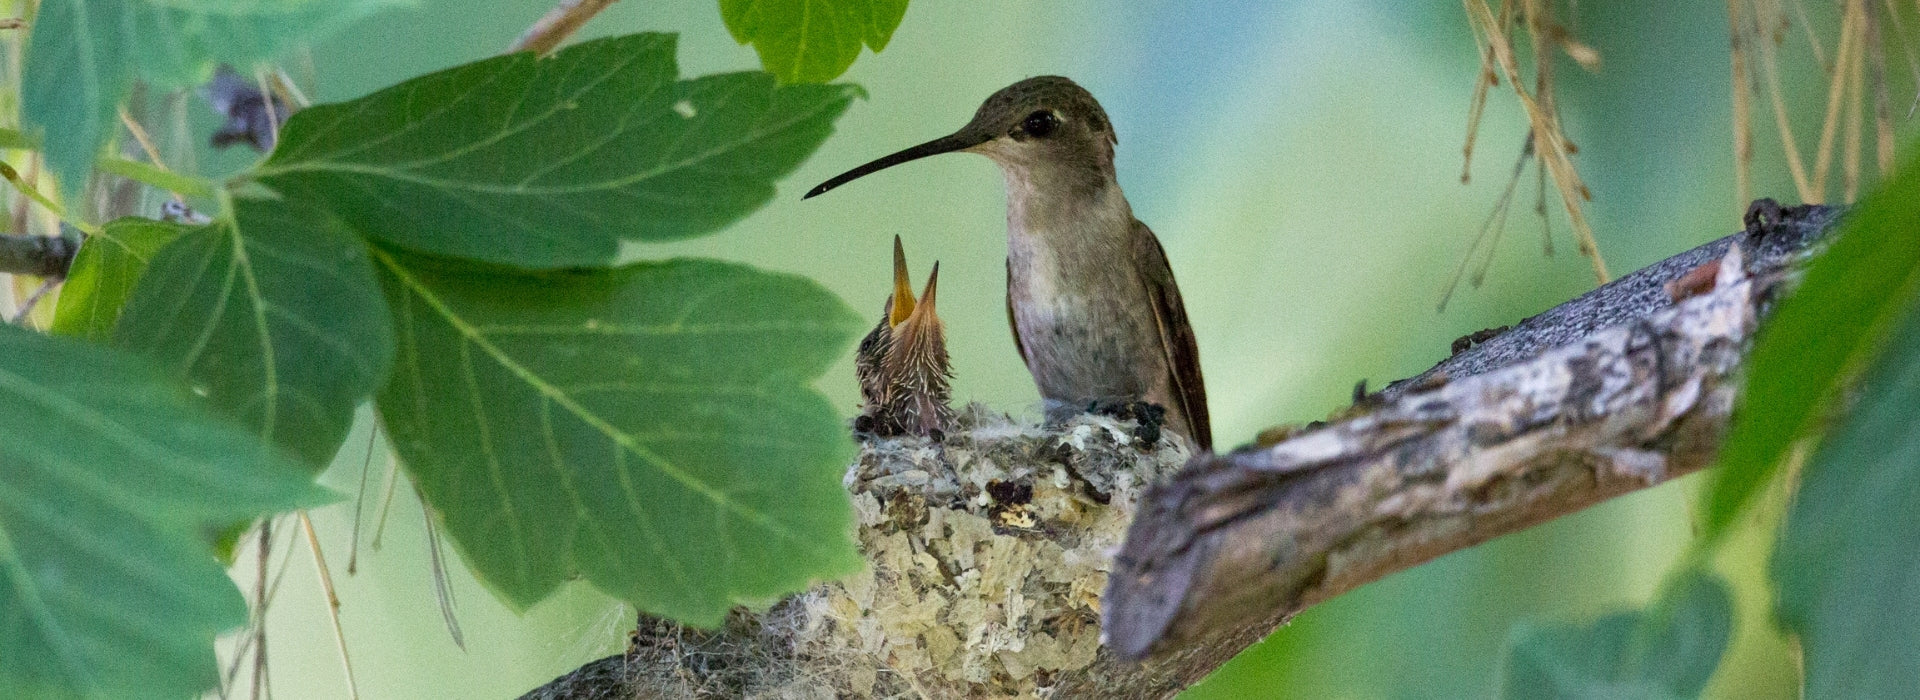 Mother Hummingbirds Protect their Young